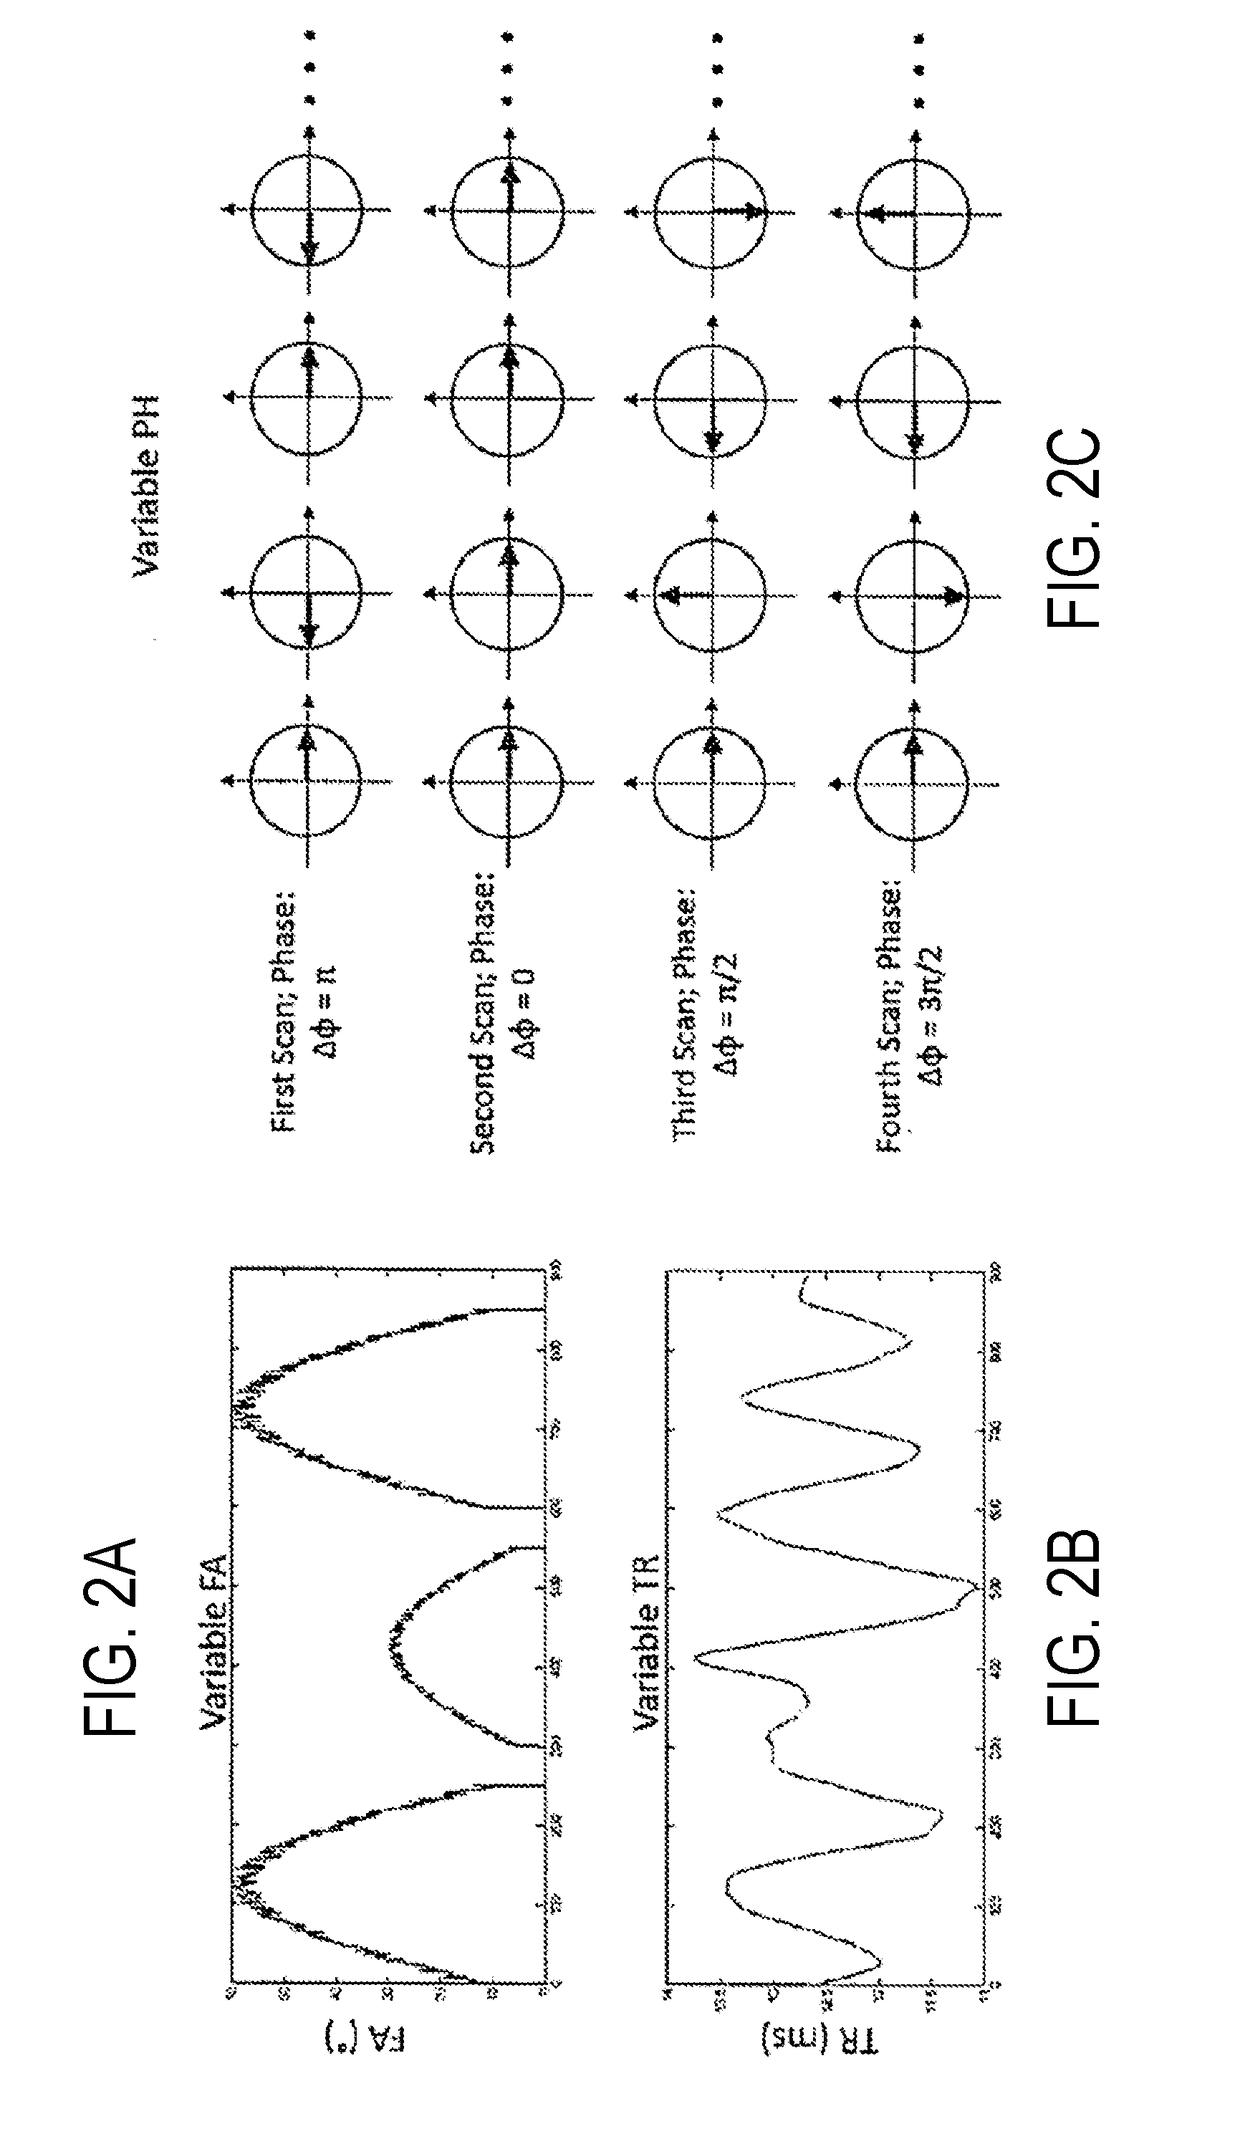 System and Method for Phase Cycling Magnetic Resonance Fingerprinting (PHC-MRF)